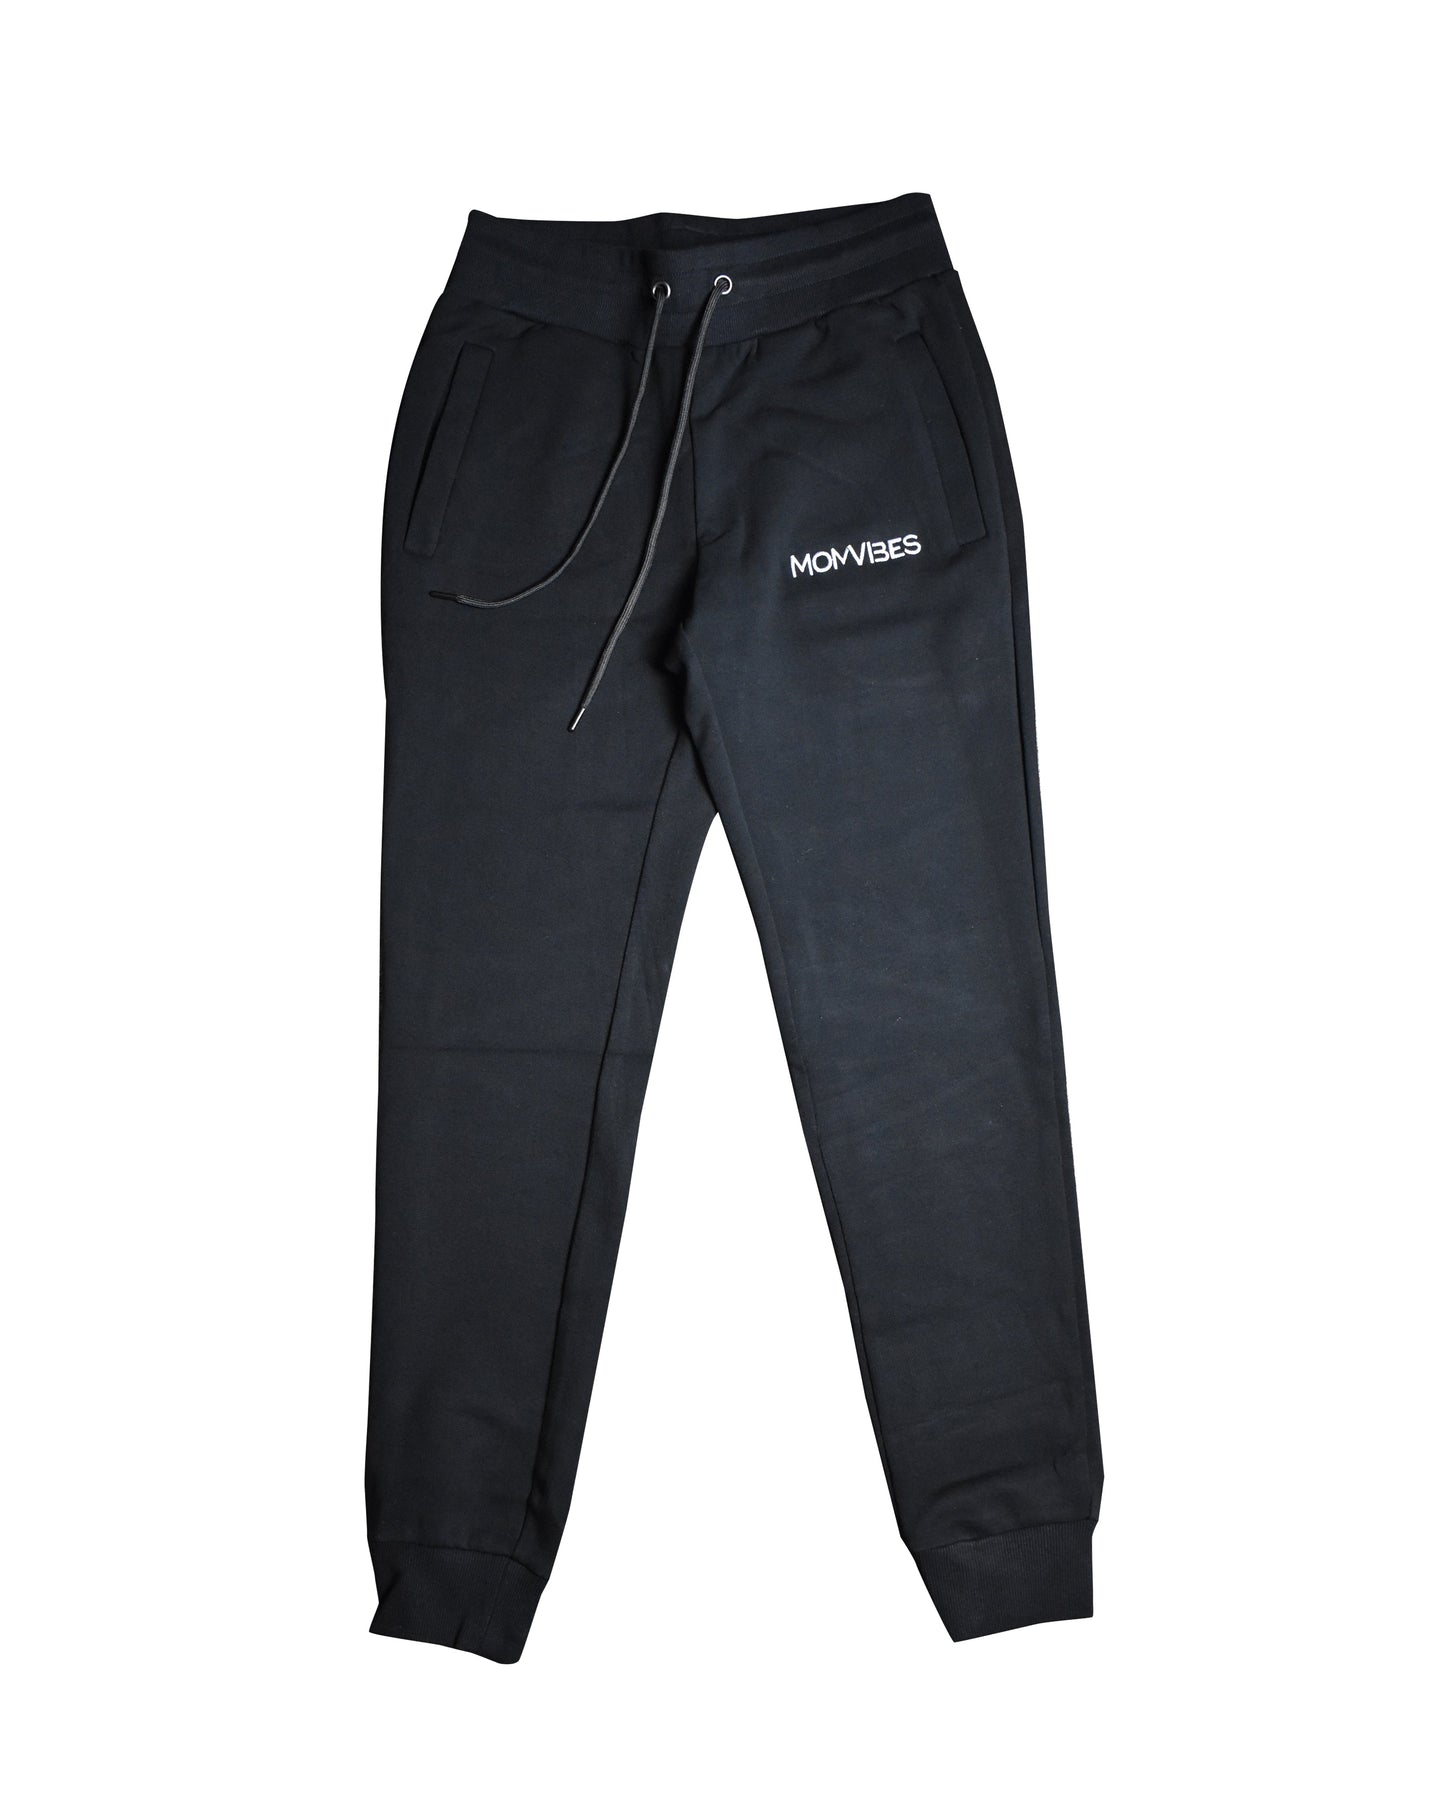 MomVibes Every Day Joggers (BLACK)